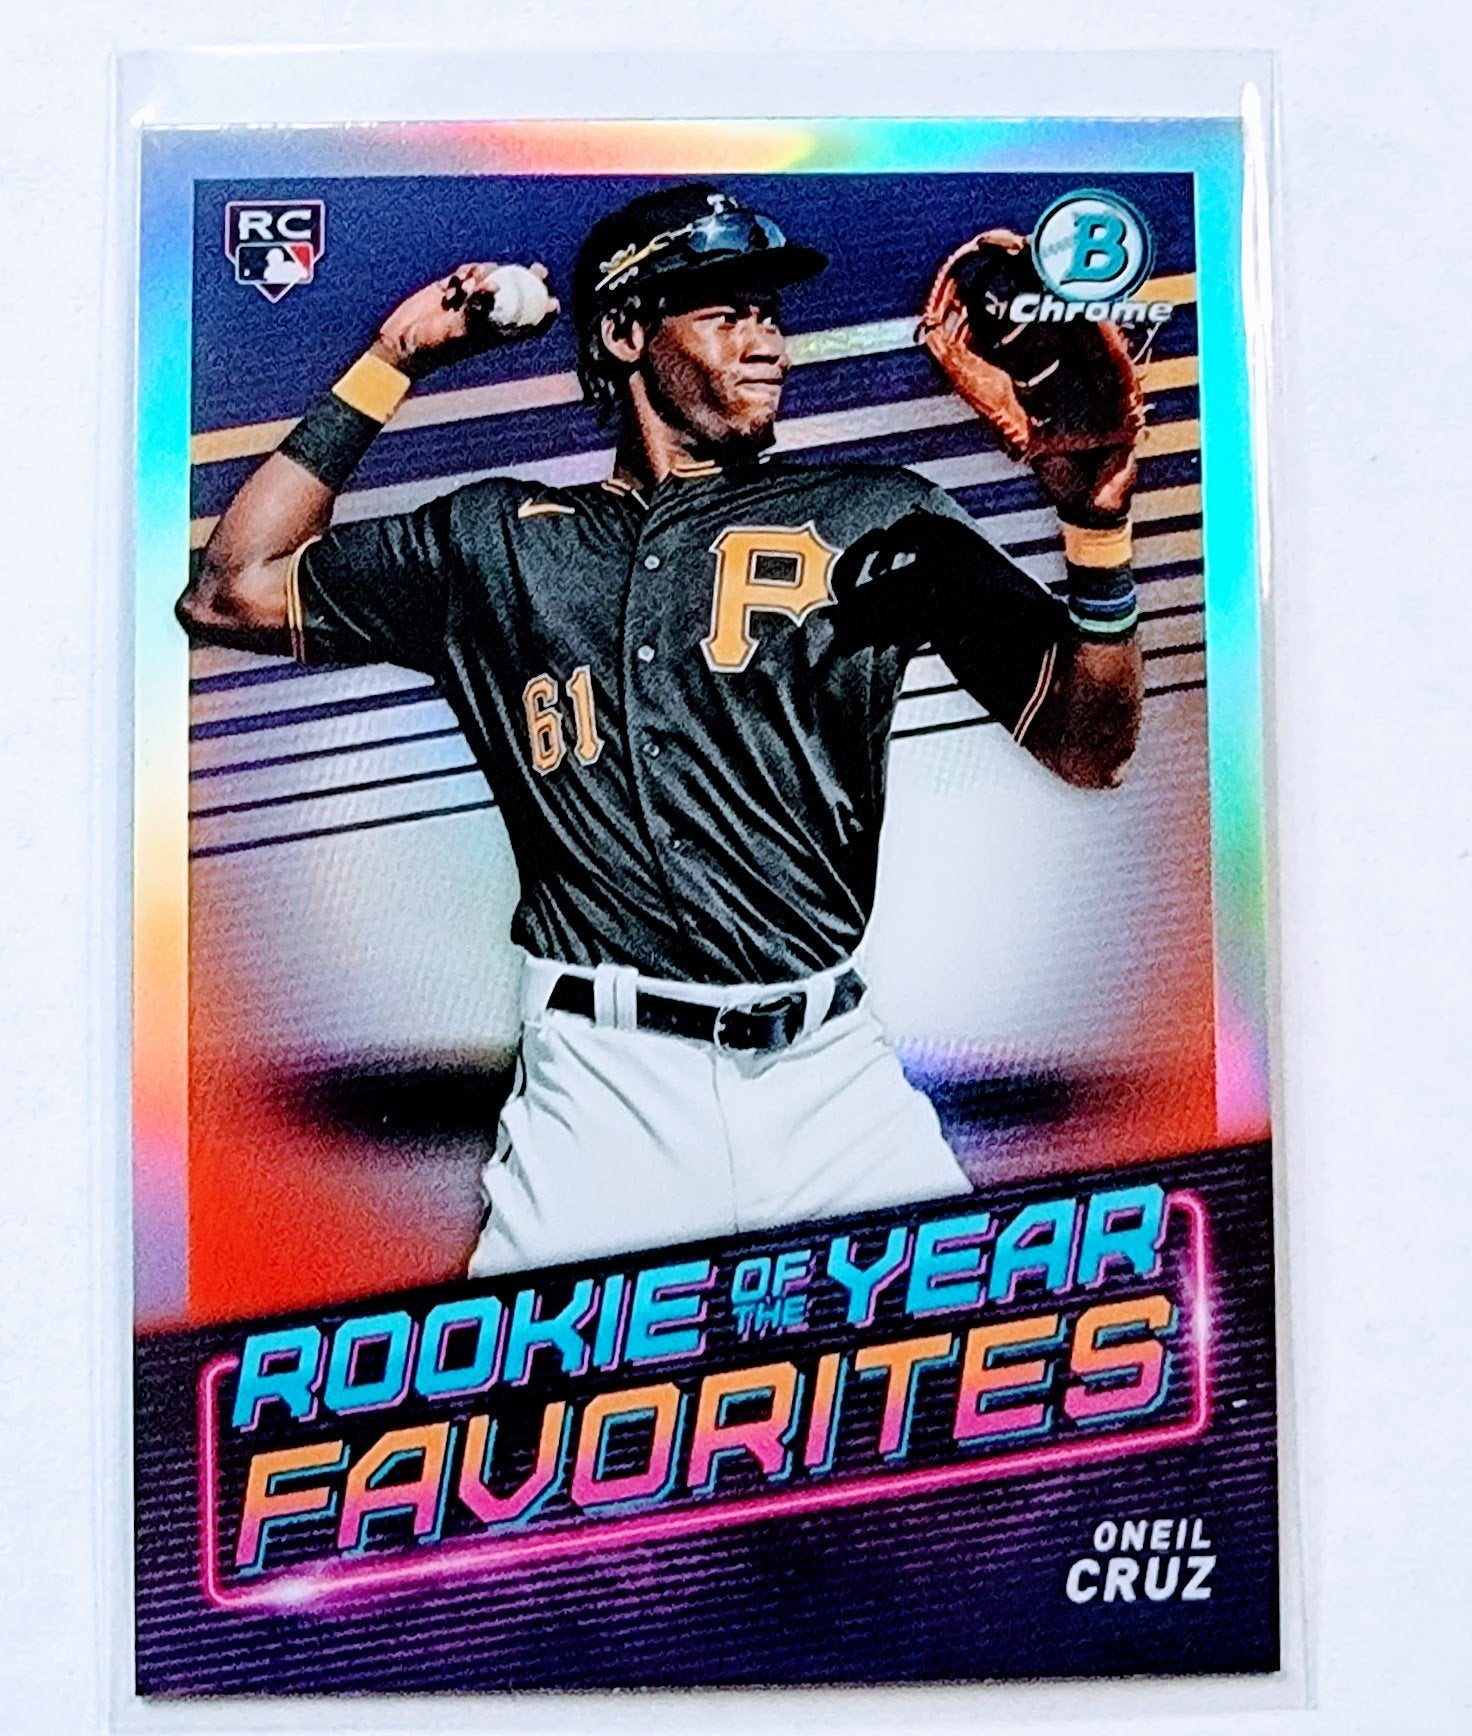 2022 Bowman Chrome Oneil Cruz Mega Box Rookie of the Year Favorites Refractor Baseball Card AVM1 simple Xclusive Collectibles   